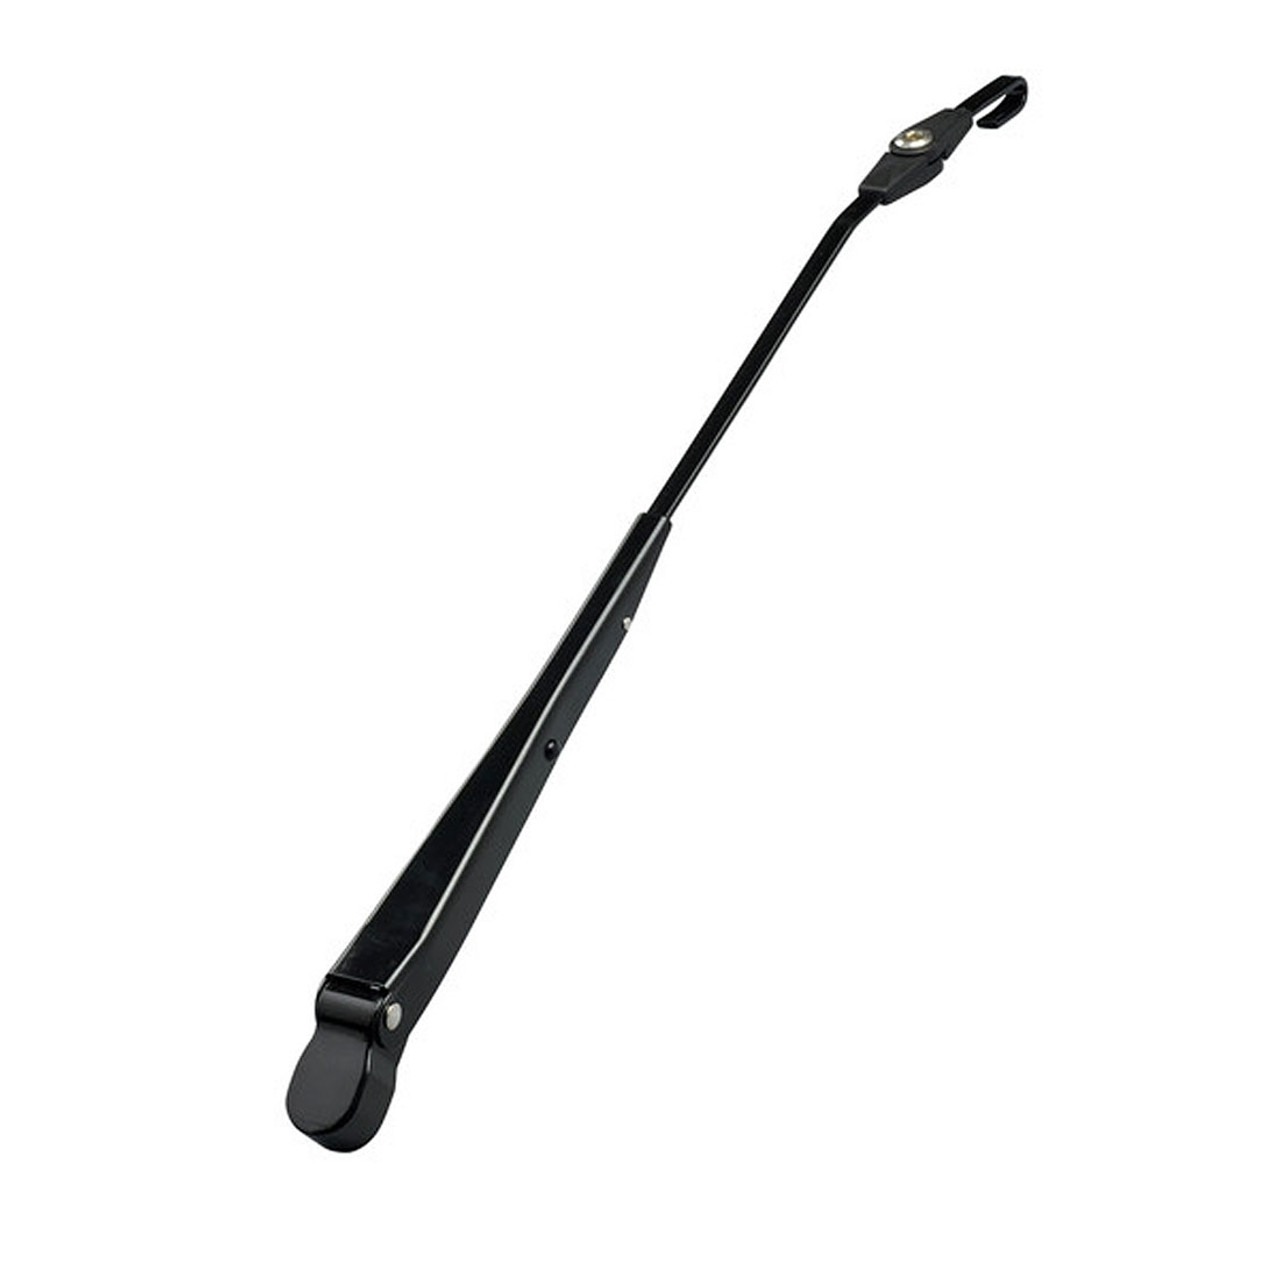 Arm Wexco Wiper 200718D